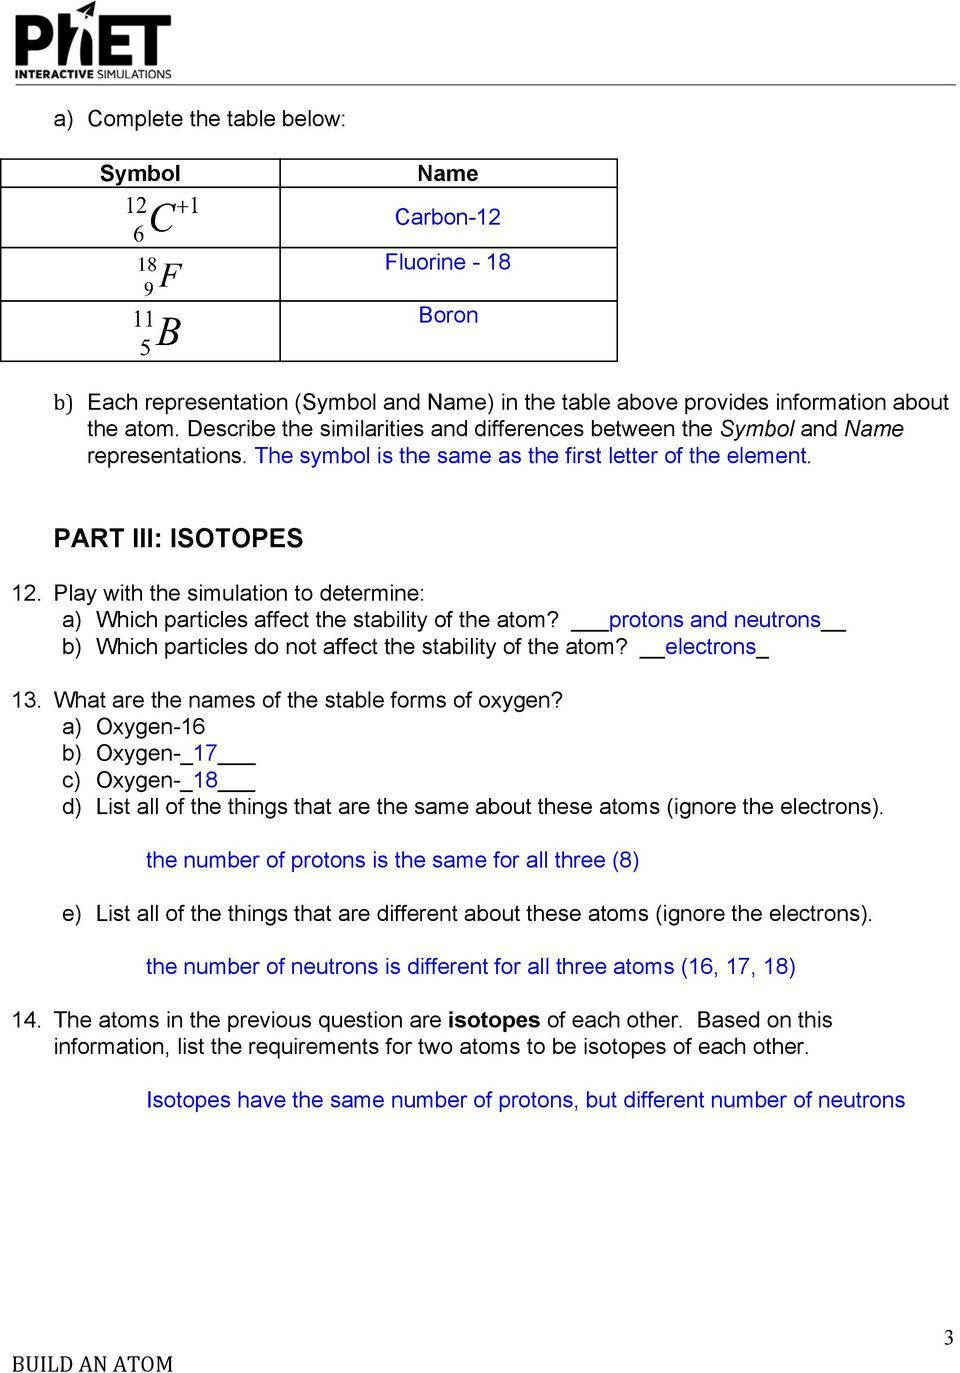 Peters Experiment Worksheet Answer Key